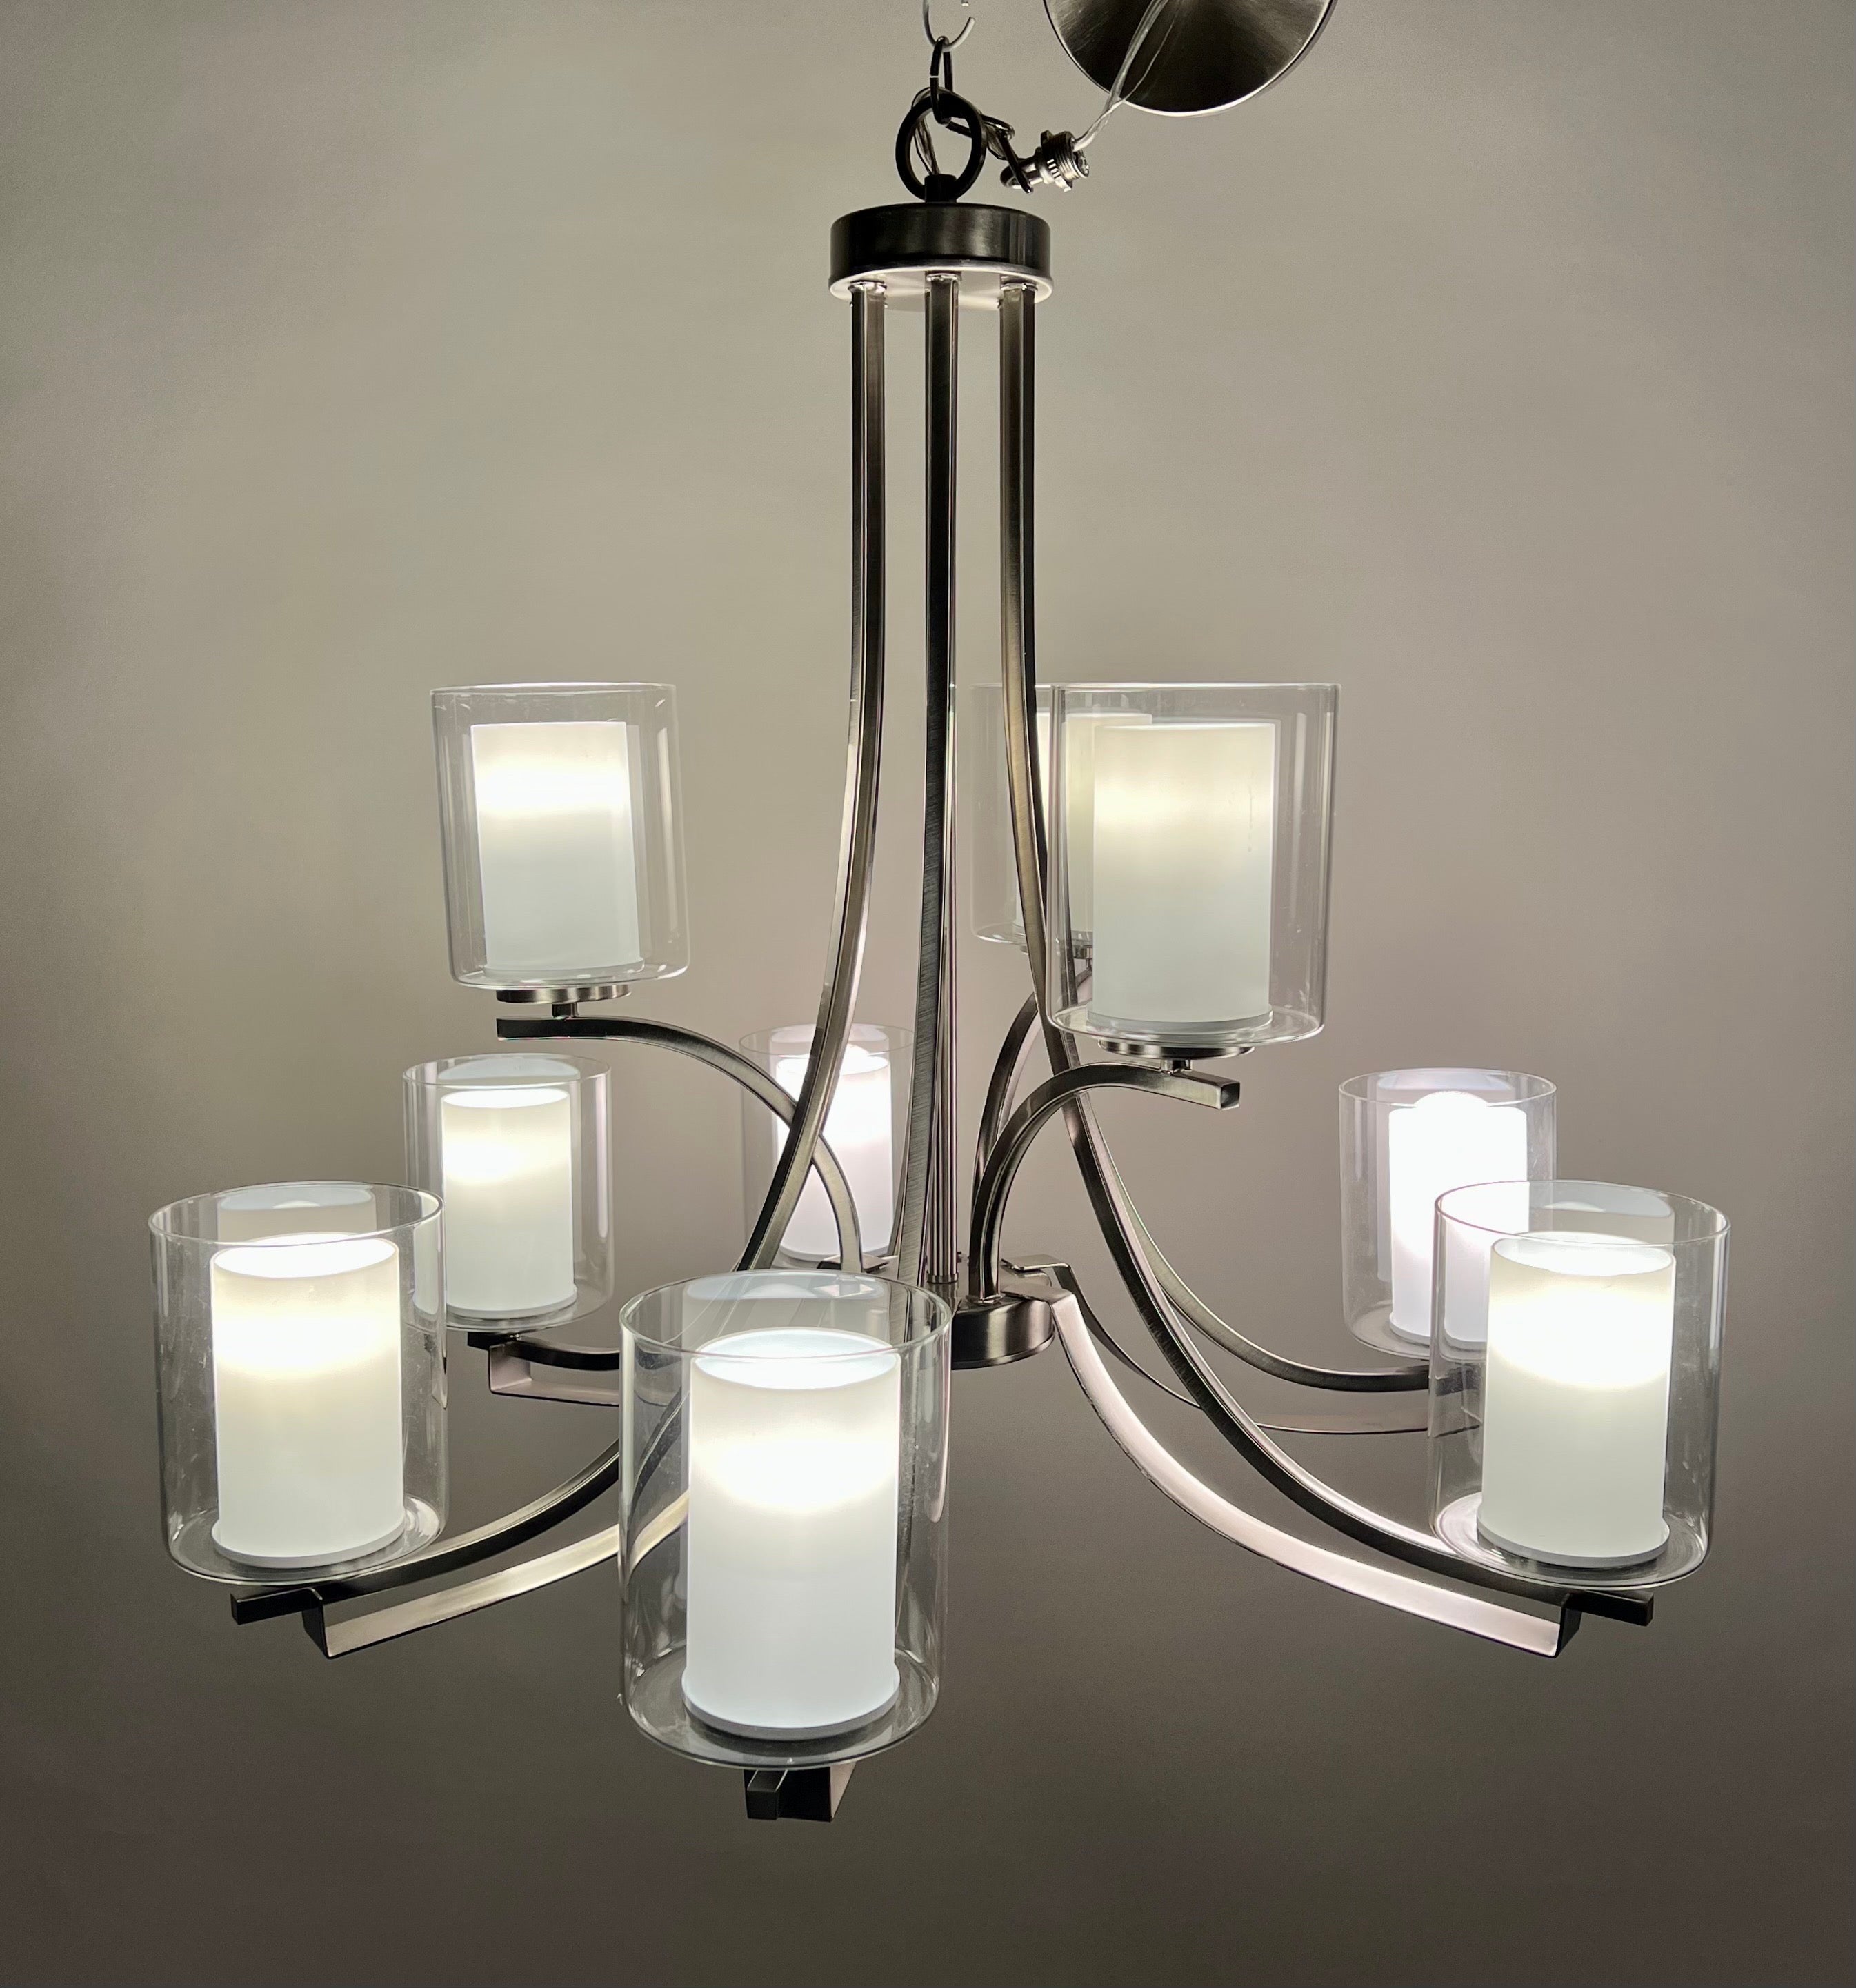  A Modern Candle Style Chrome Chandelier. With its nine radiant lights, this chandelier seamlessly combines clean, graceful lines with the timeless allure of chrome fixtures.
The defining features of this chandelier lie in the meticulously crafted